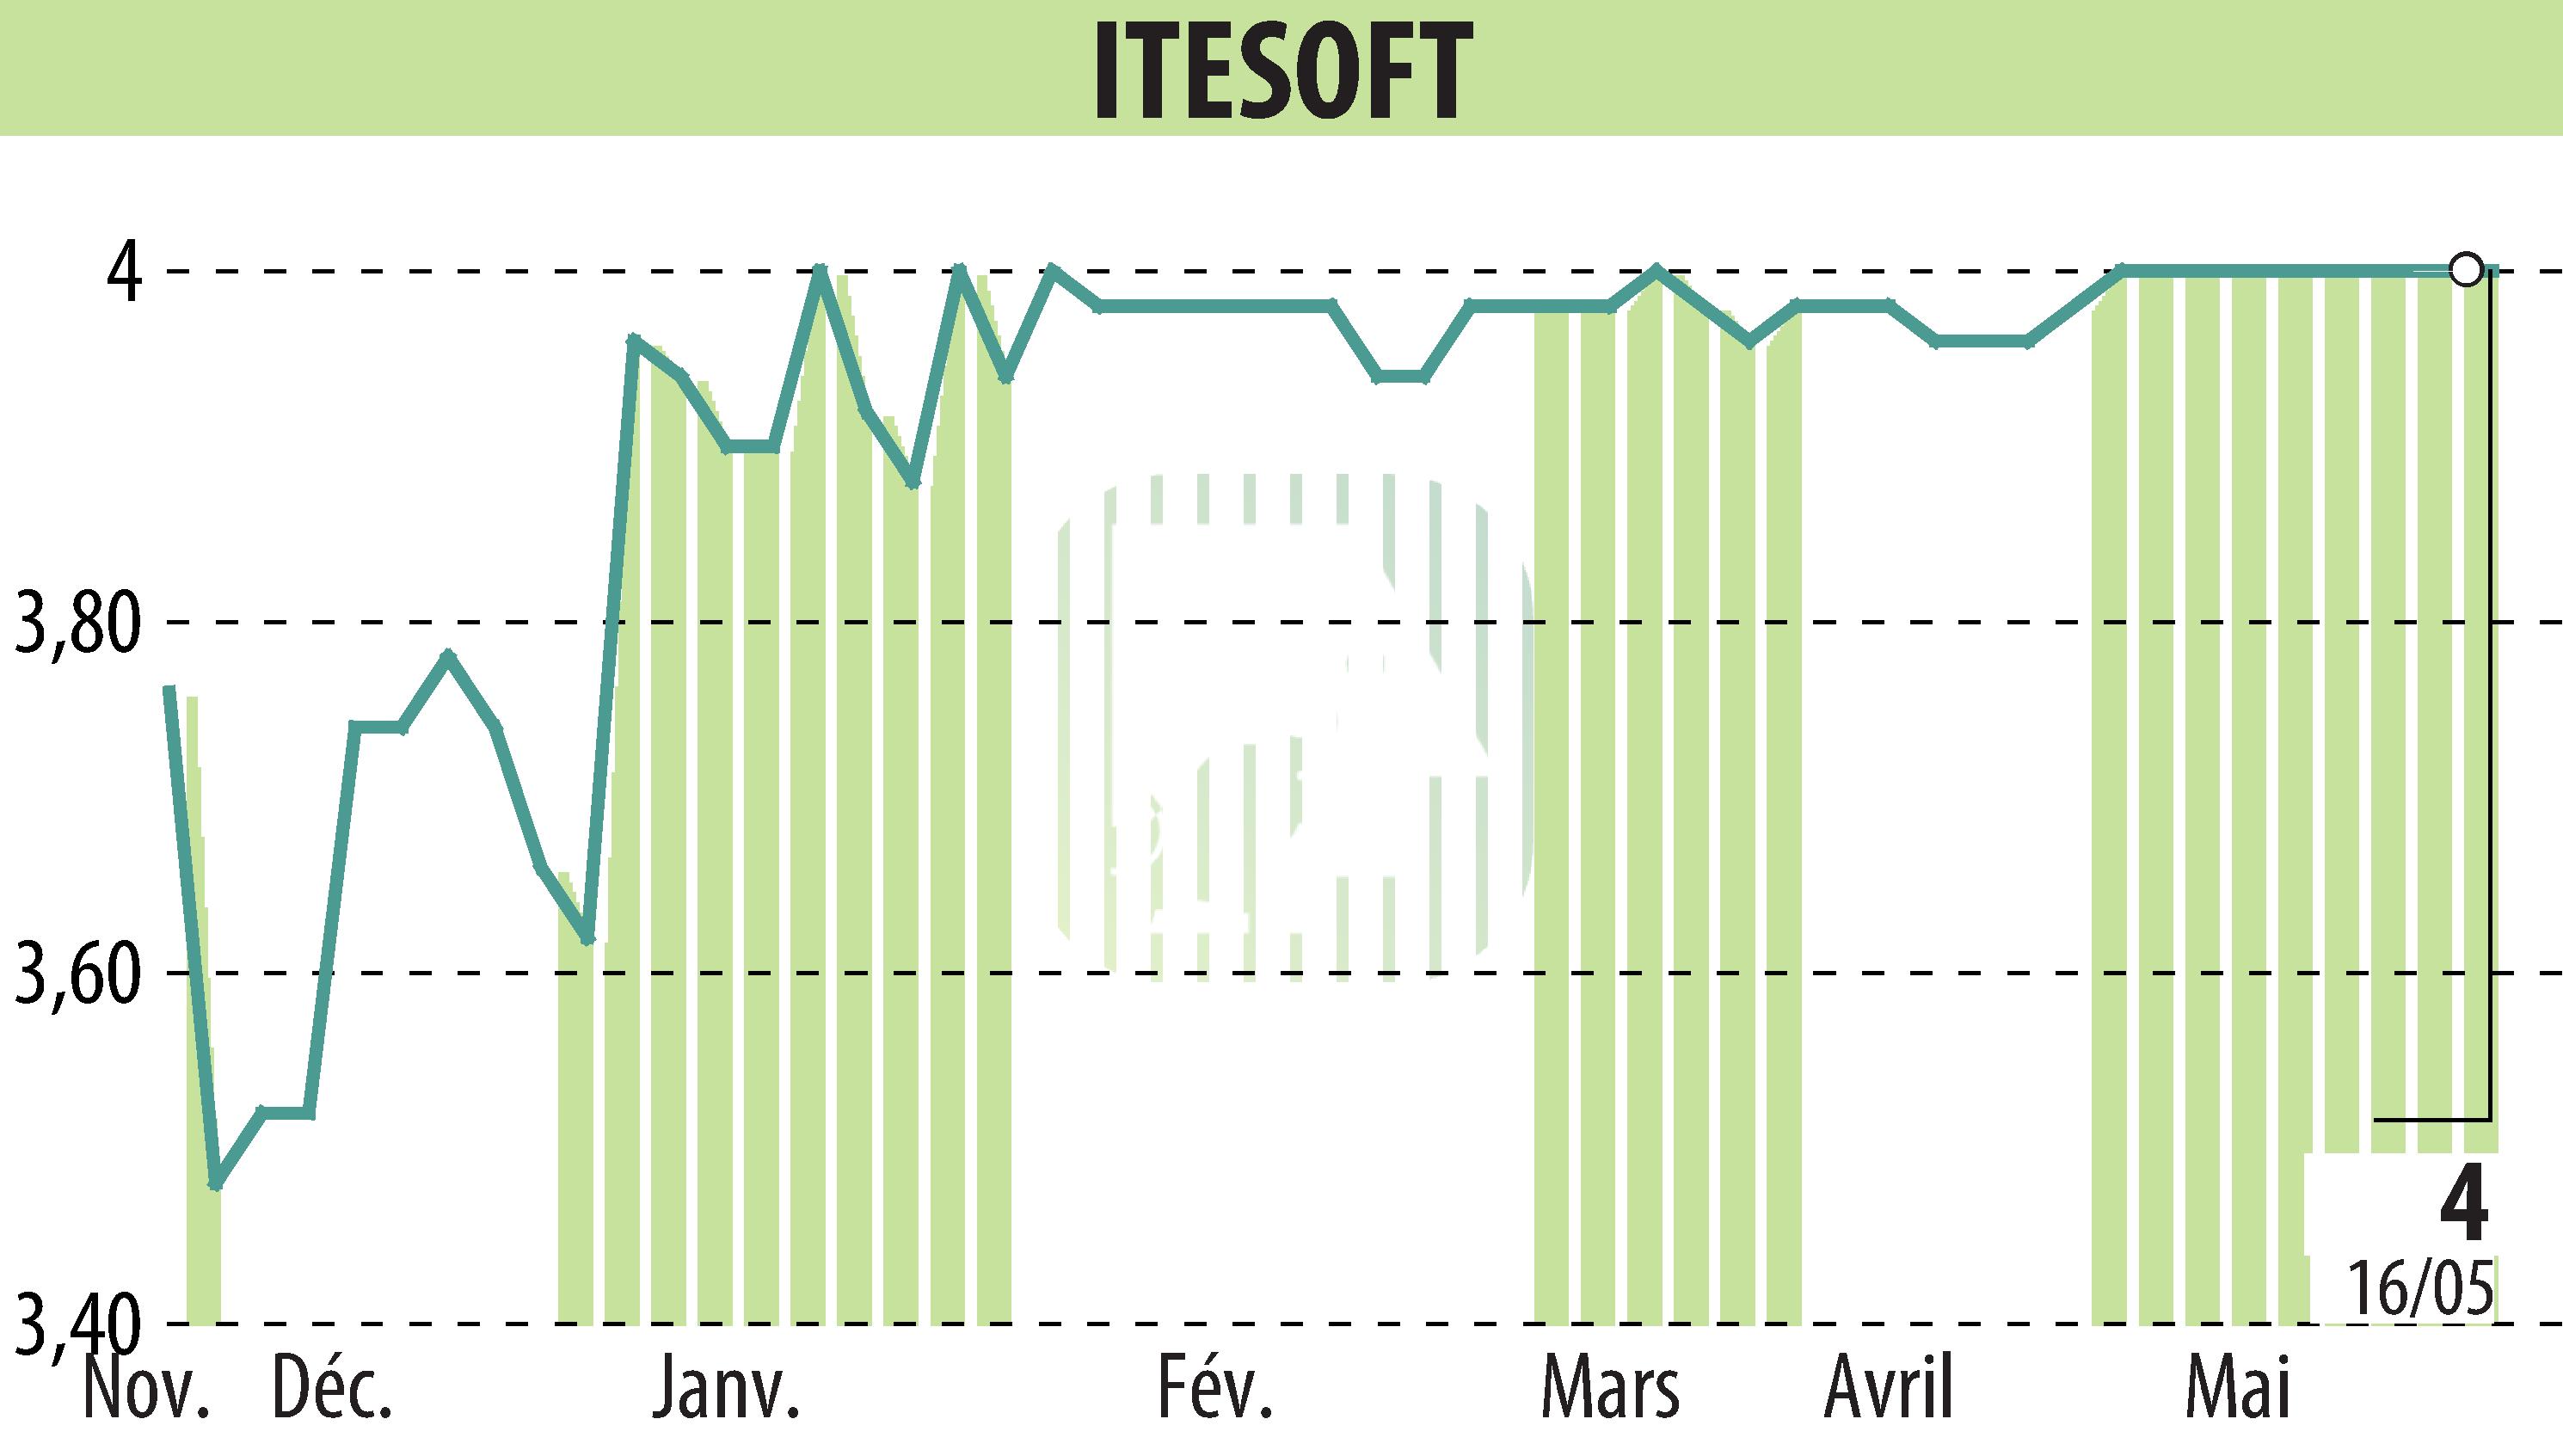 Stock price chart of ITESOFT (EPA:ITE) showing fluctuations.